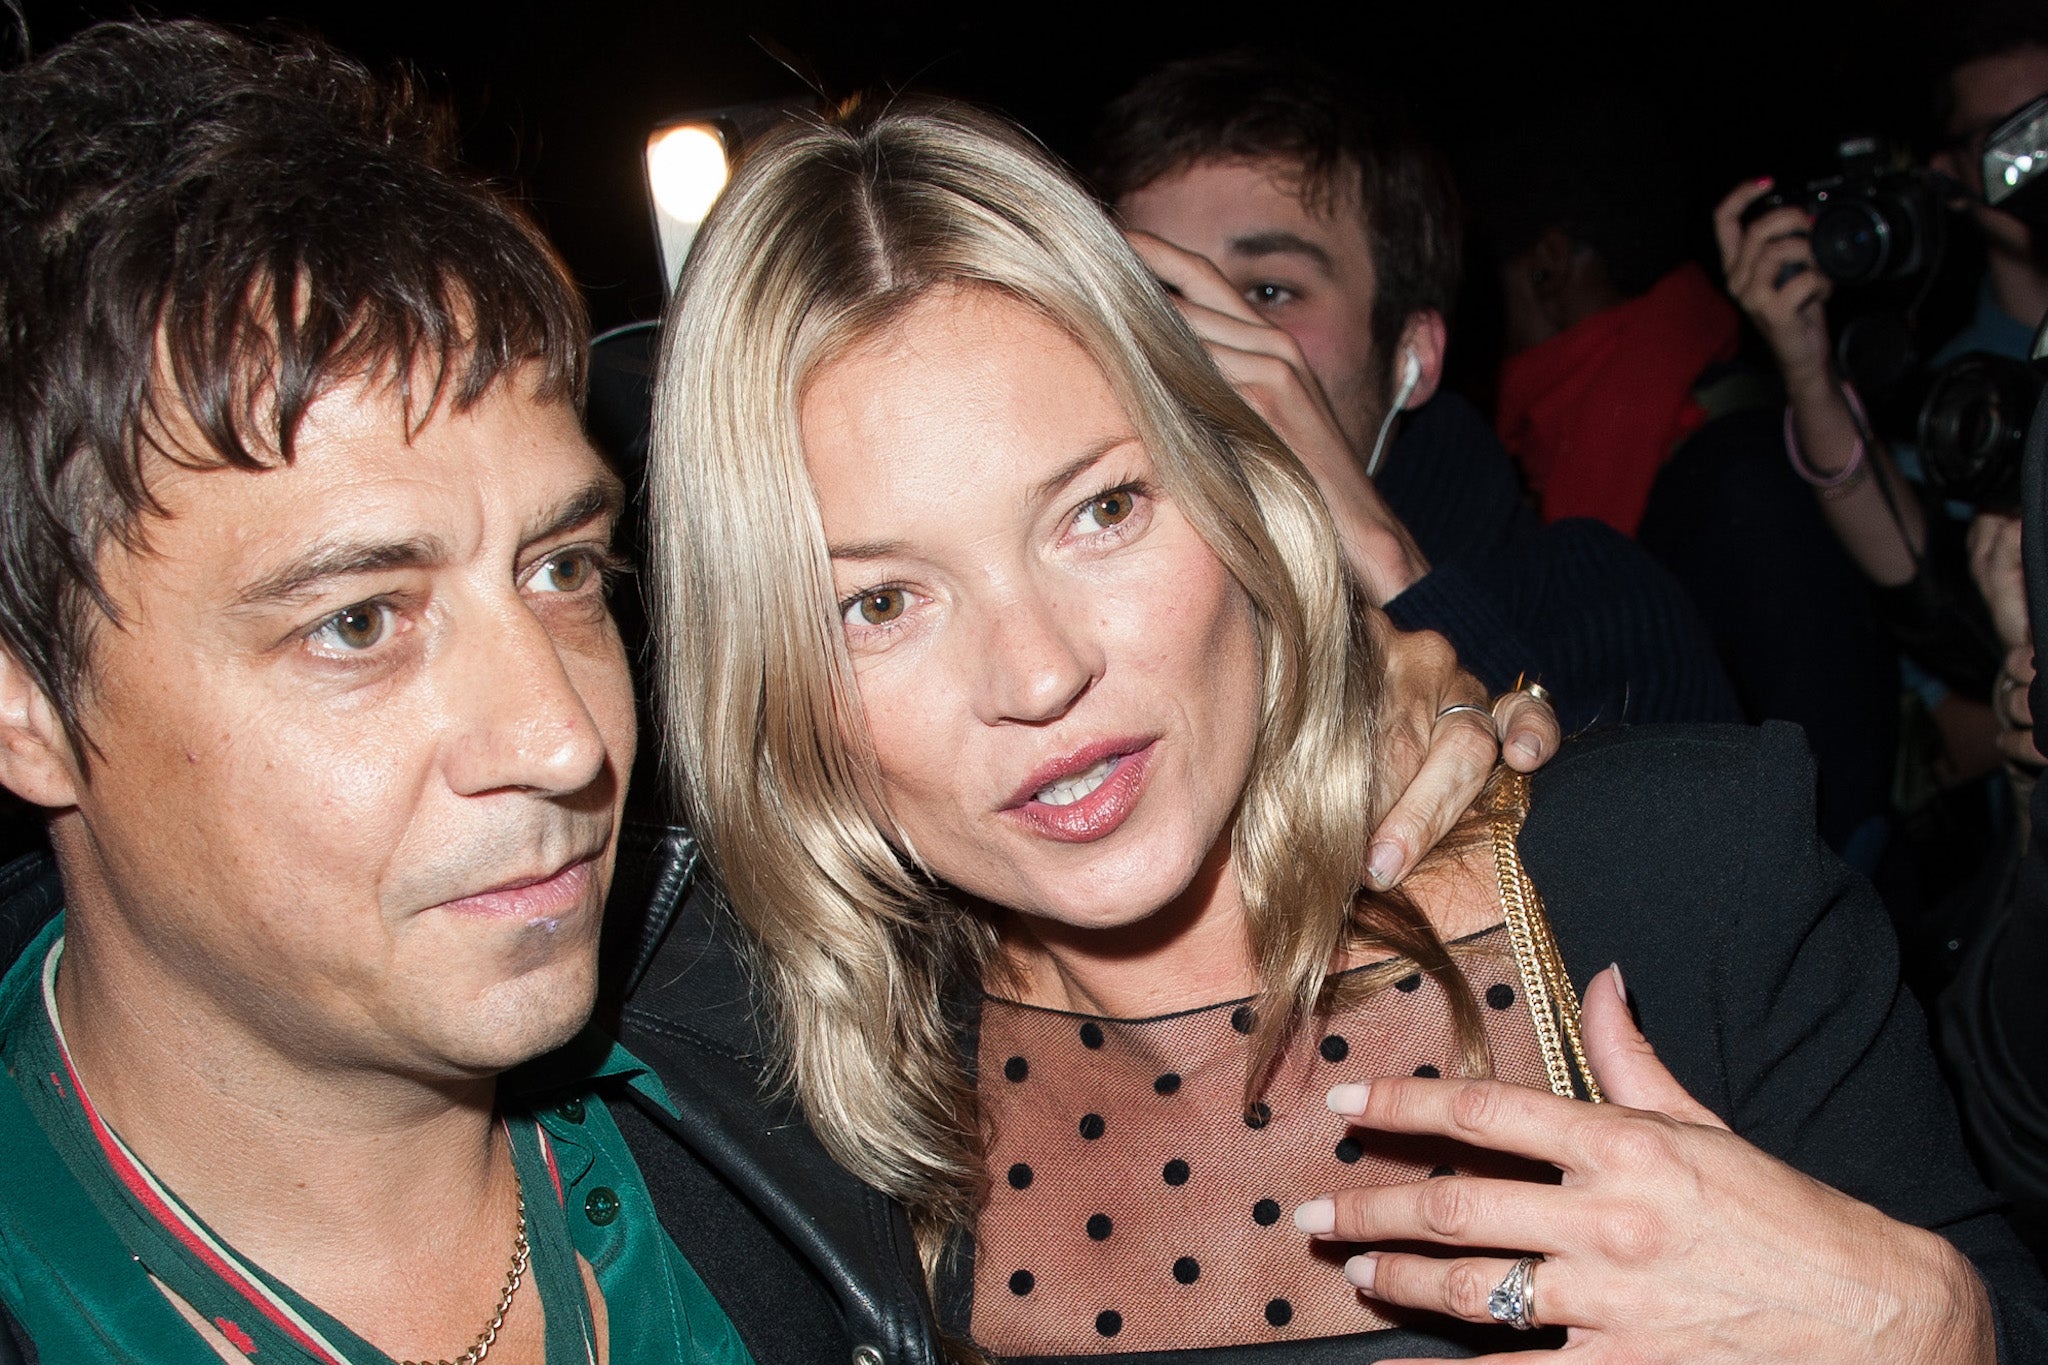 Kate Moss and Hince together at Paris Fashion Week in 2012